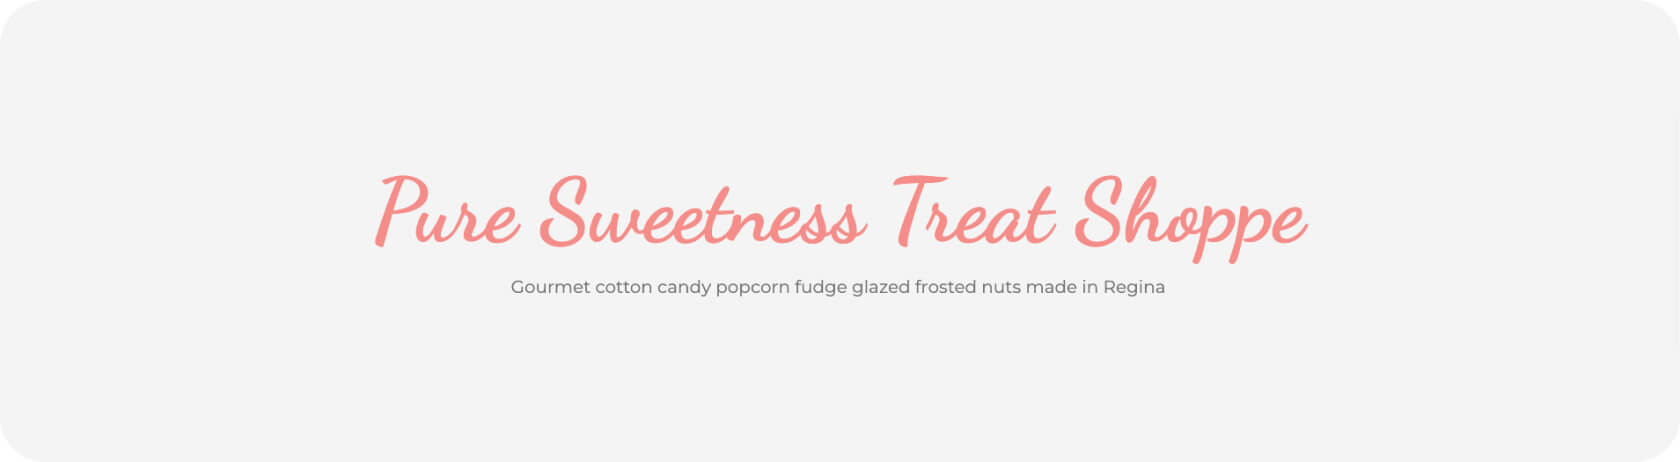 Text reading " Pure Sweetness Treat Shoppe Gouret cotton candy popcorn fudge glazed frosted nuts made in Regina", with grey background